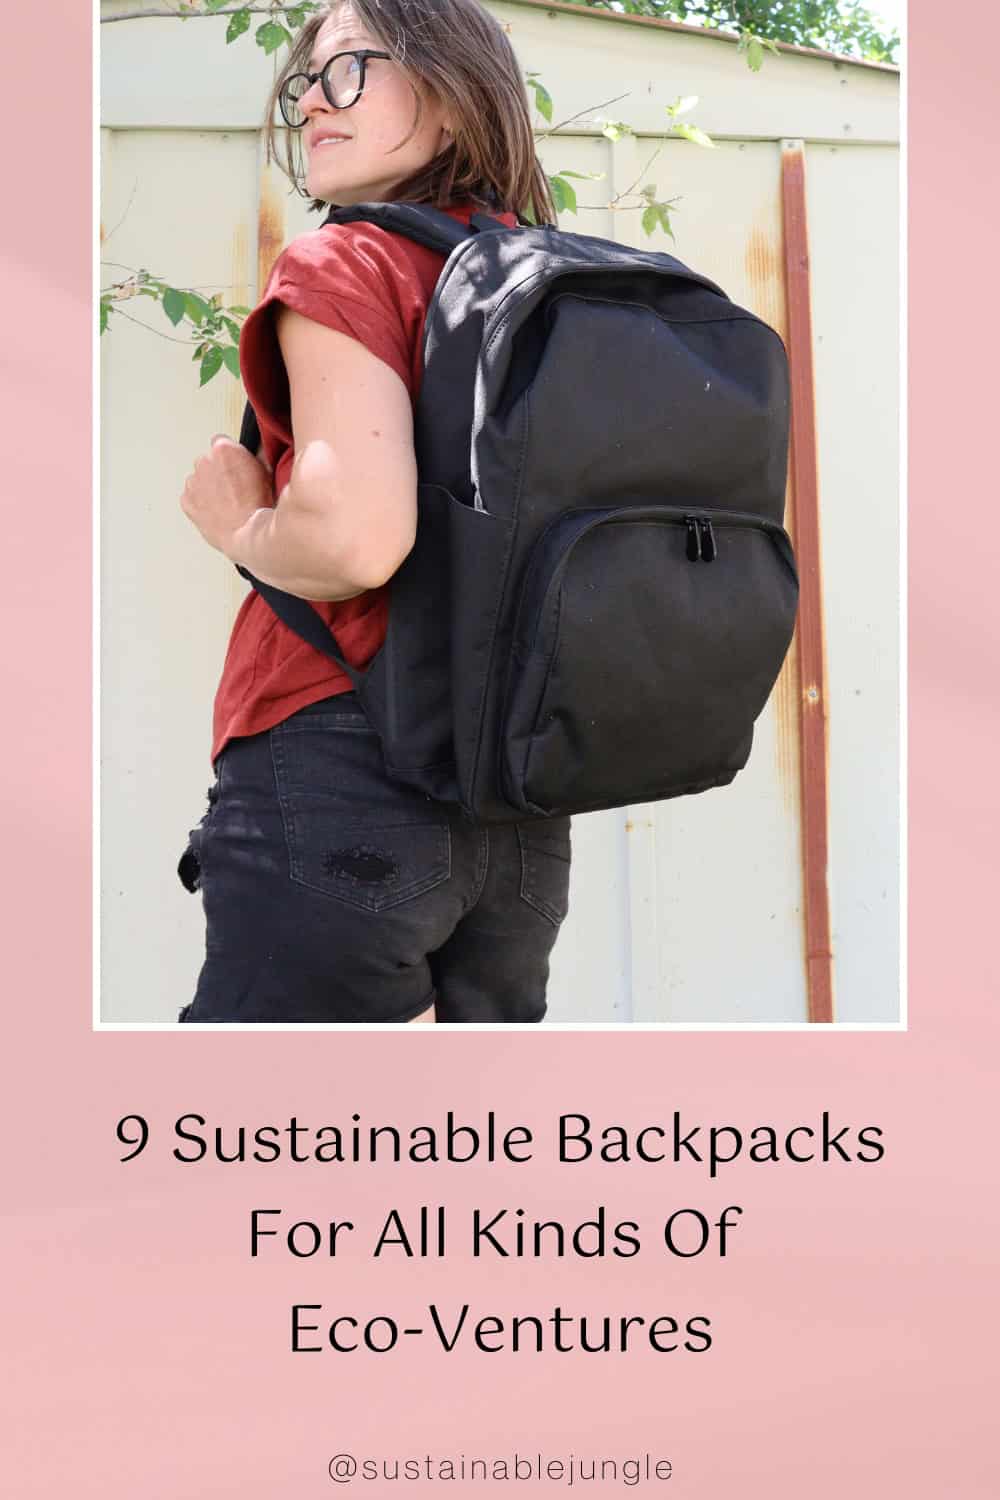 9 Sustainable Backpacks for All Kinds Of Eco-Ventures Image by Sustainable Jungle #sustainablebackpacks #bestsustainablebackpacks #ecofriendlybackpacks #ecofriendlybackpacksforschool #sustainablebackpackbrands #sustainablelaptopbackpacks #sustainablejungle